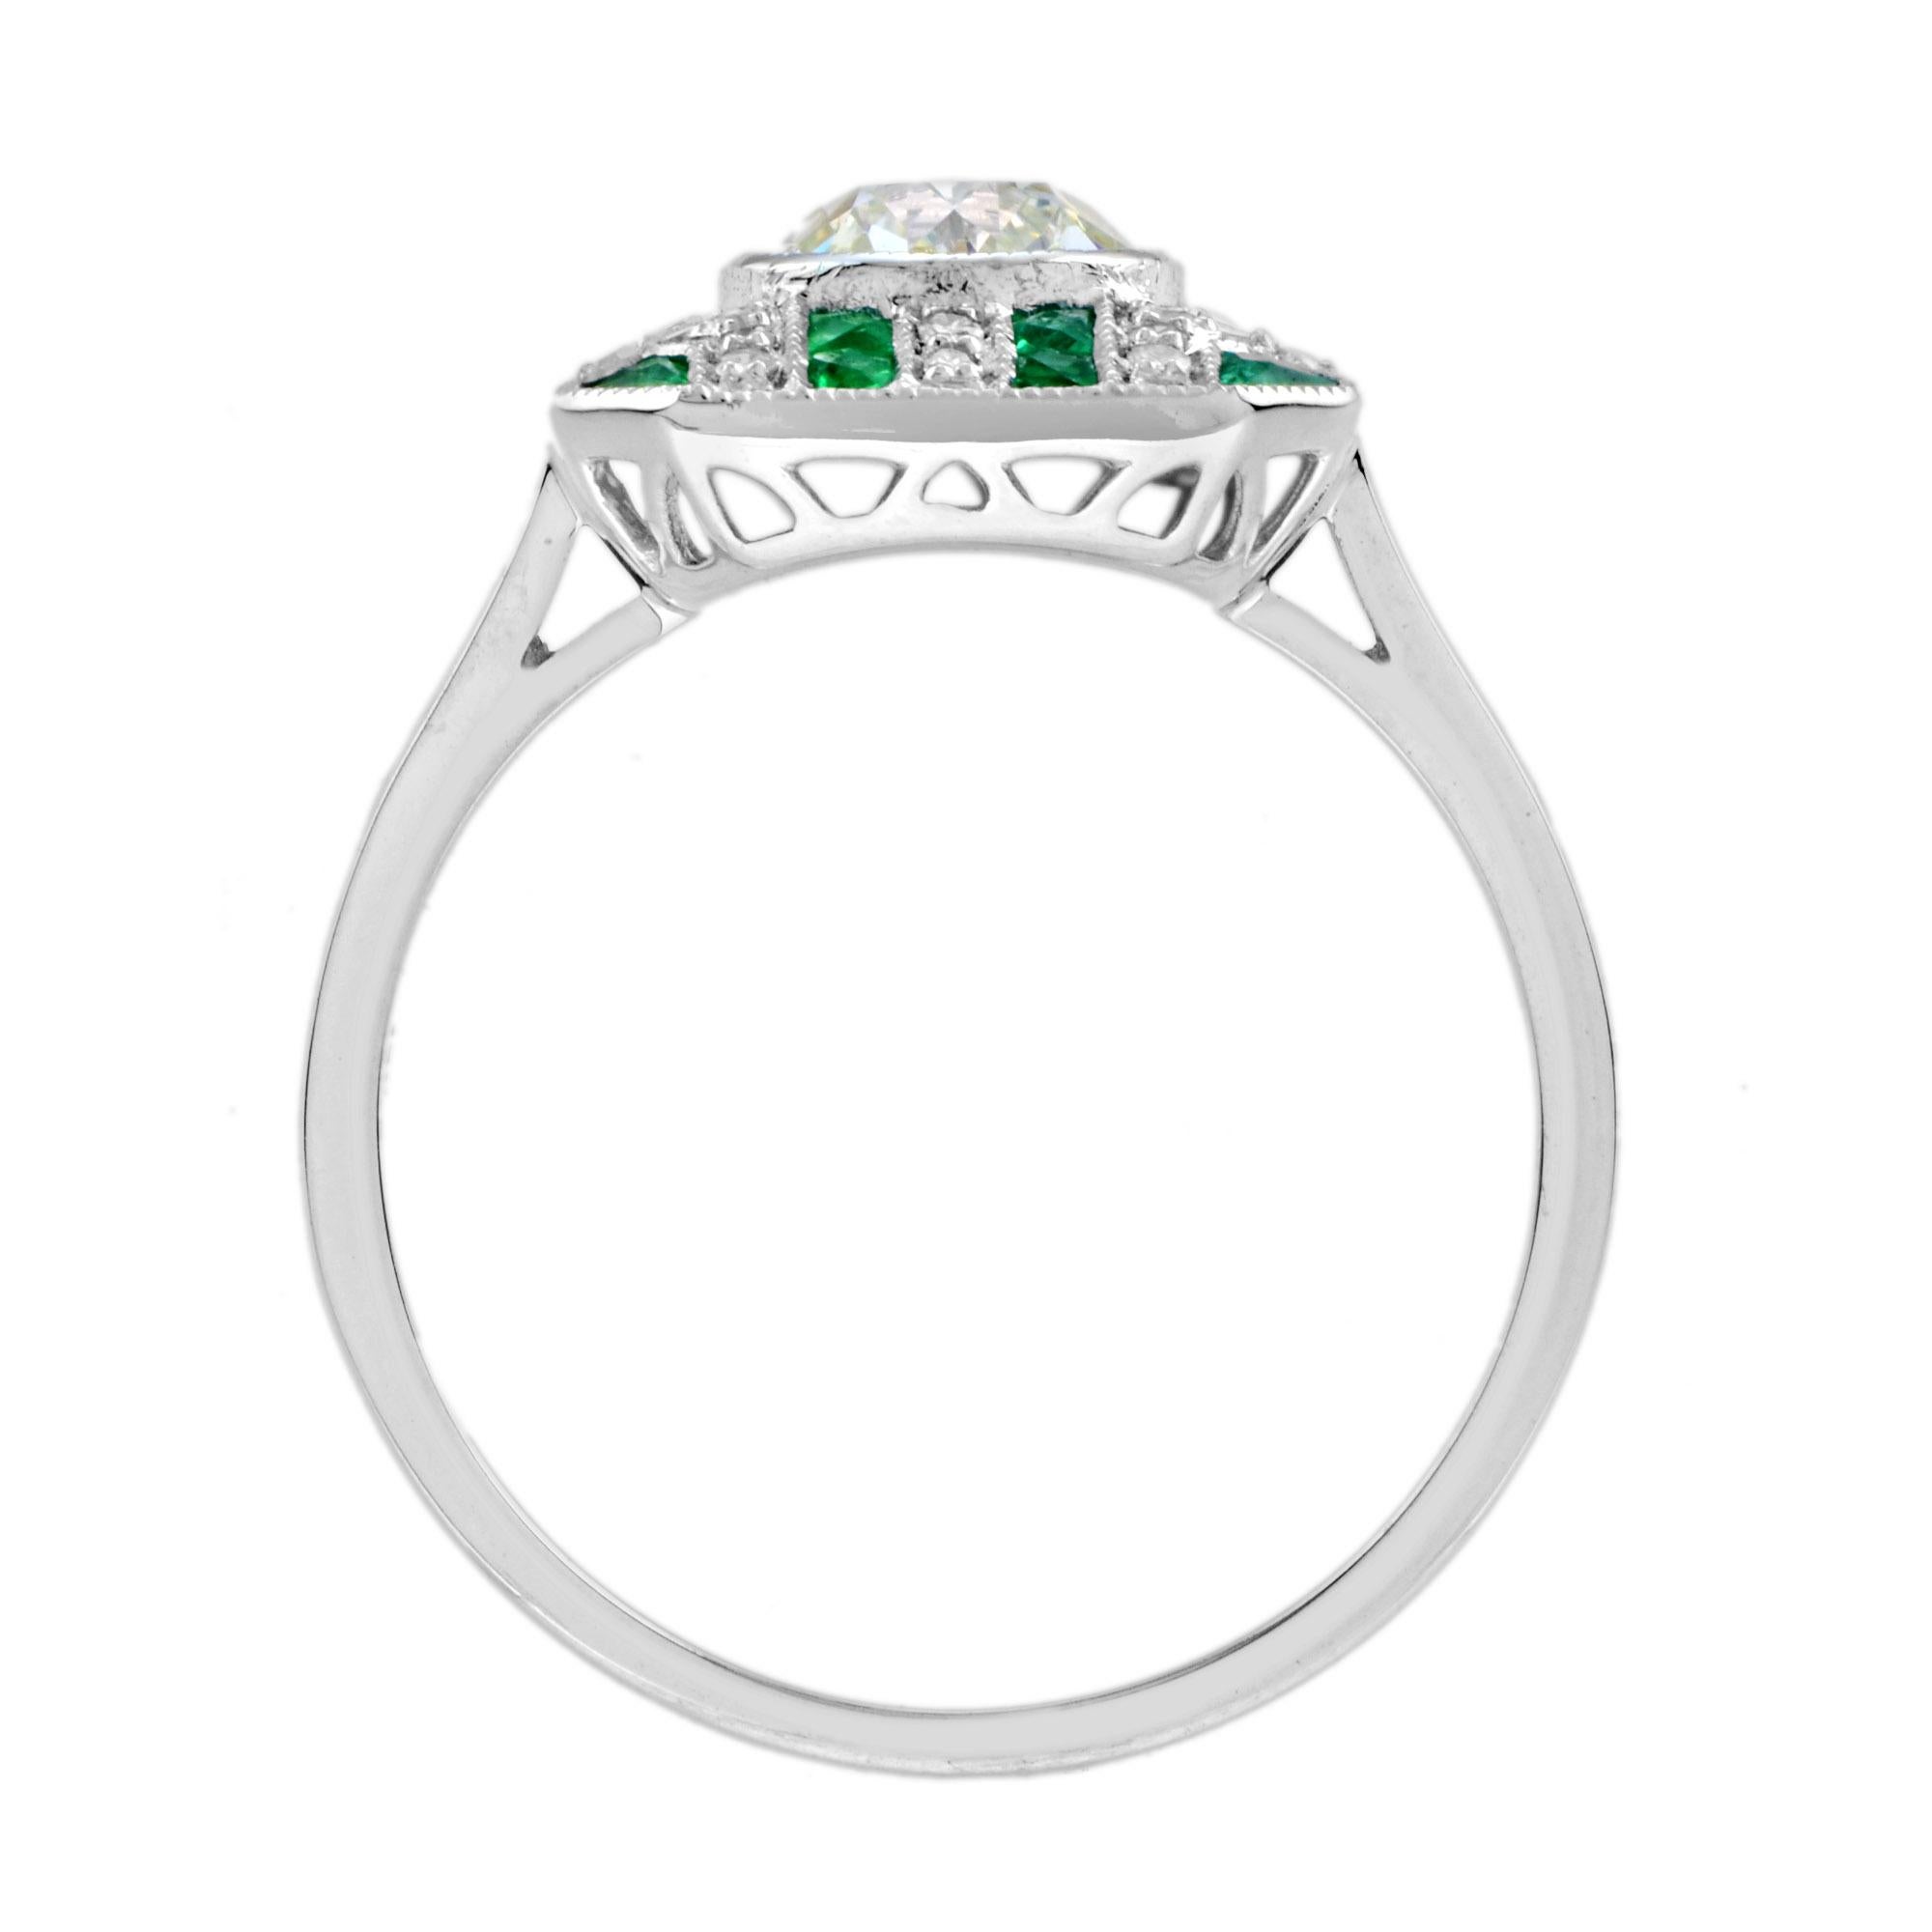 GIA Diamond with Emerald Art Deco Style Engagement Ring in 18k White Gold For Sale 3